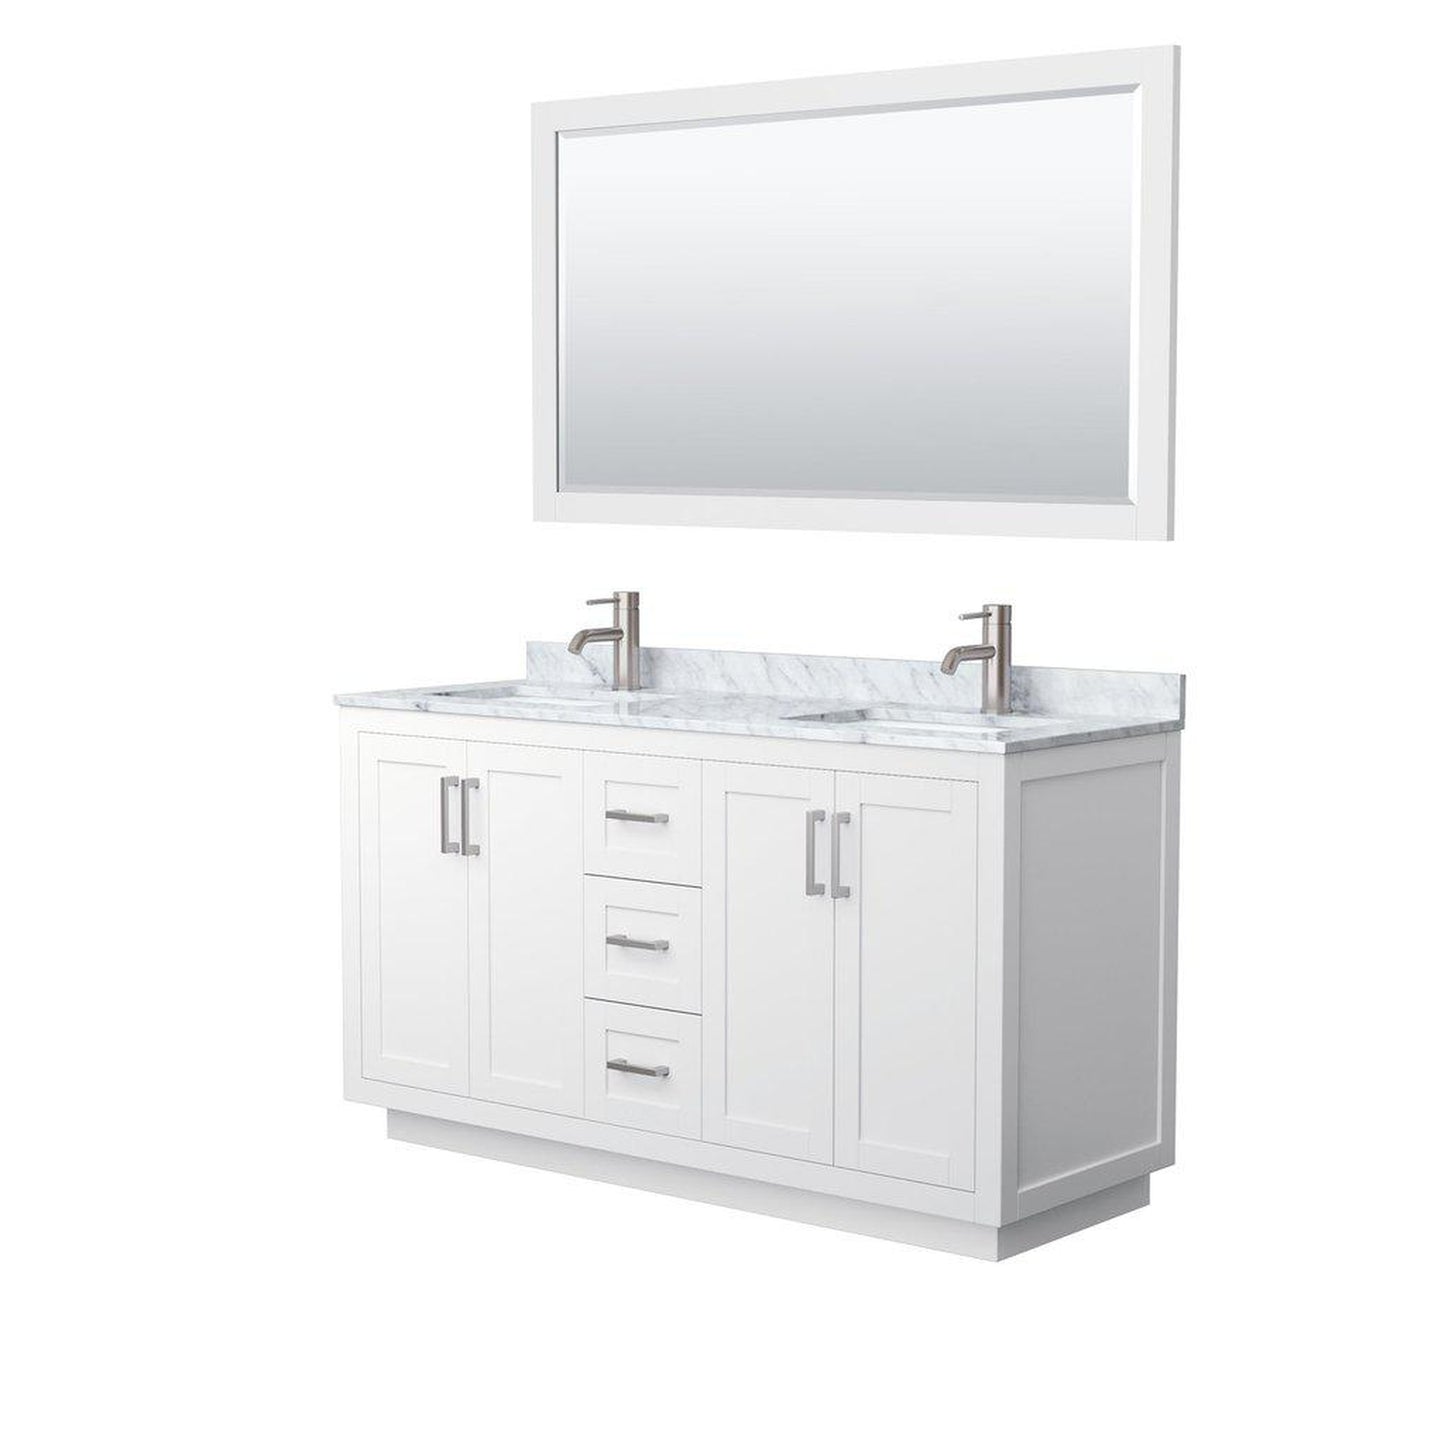 Wyndham Collection Miranda 60" Double Bathroom White Vanity Set With White Carrara Marble Countertop, Undermount Square Sink, 58" Mirror And Brushed Nickel Trim